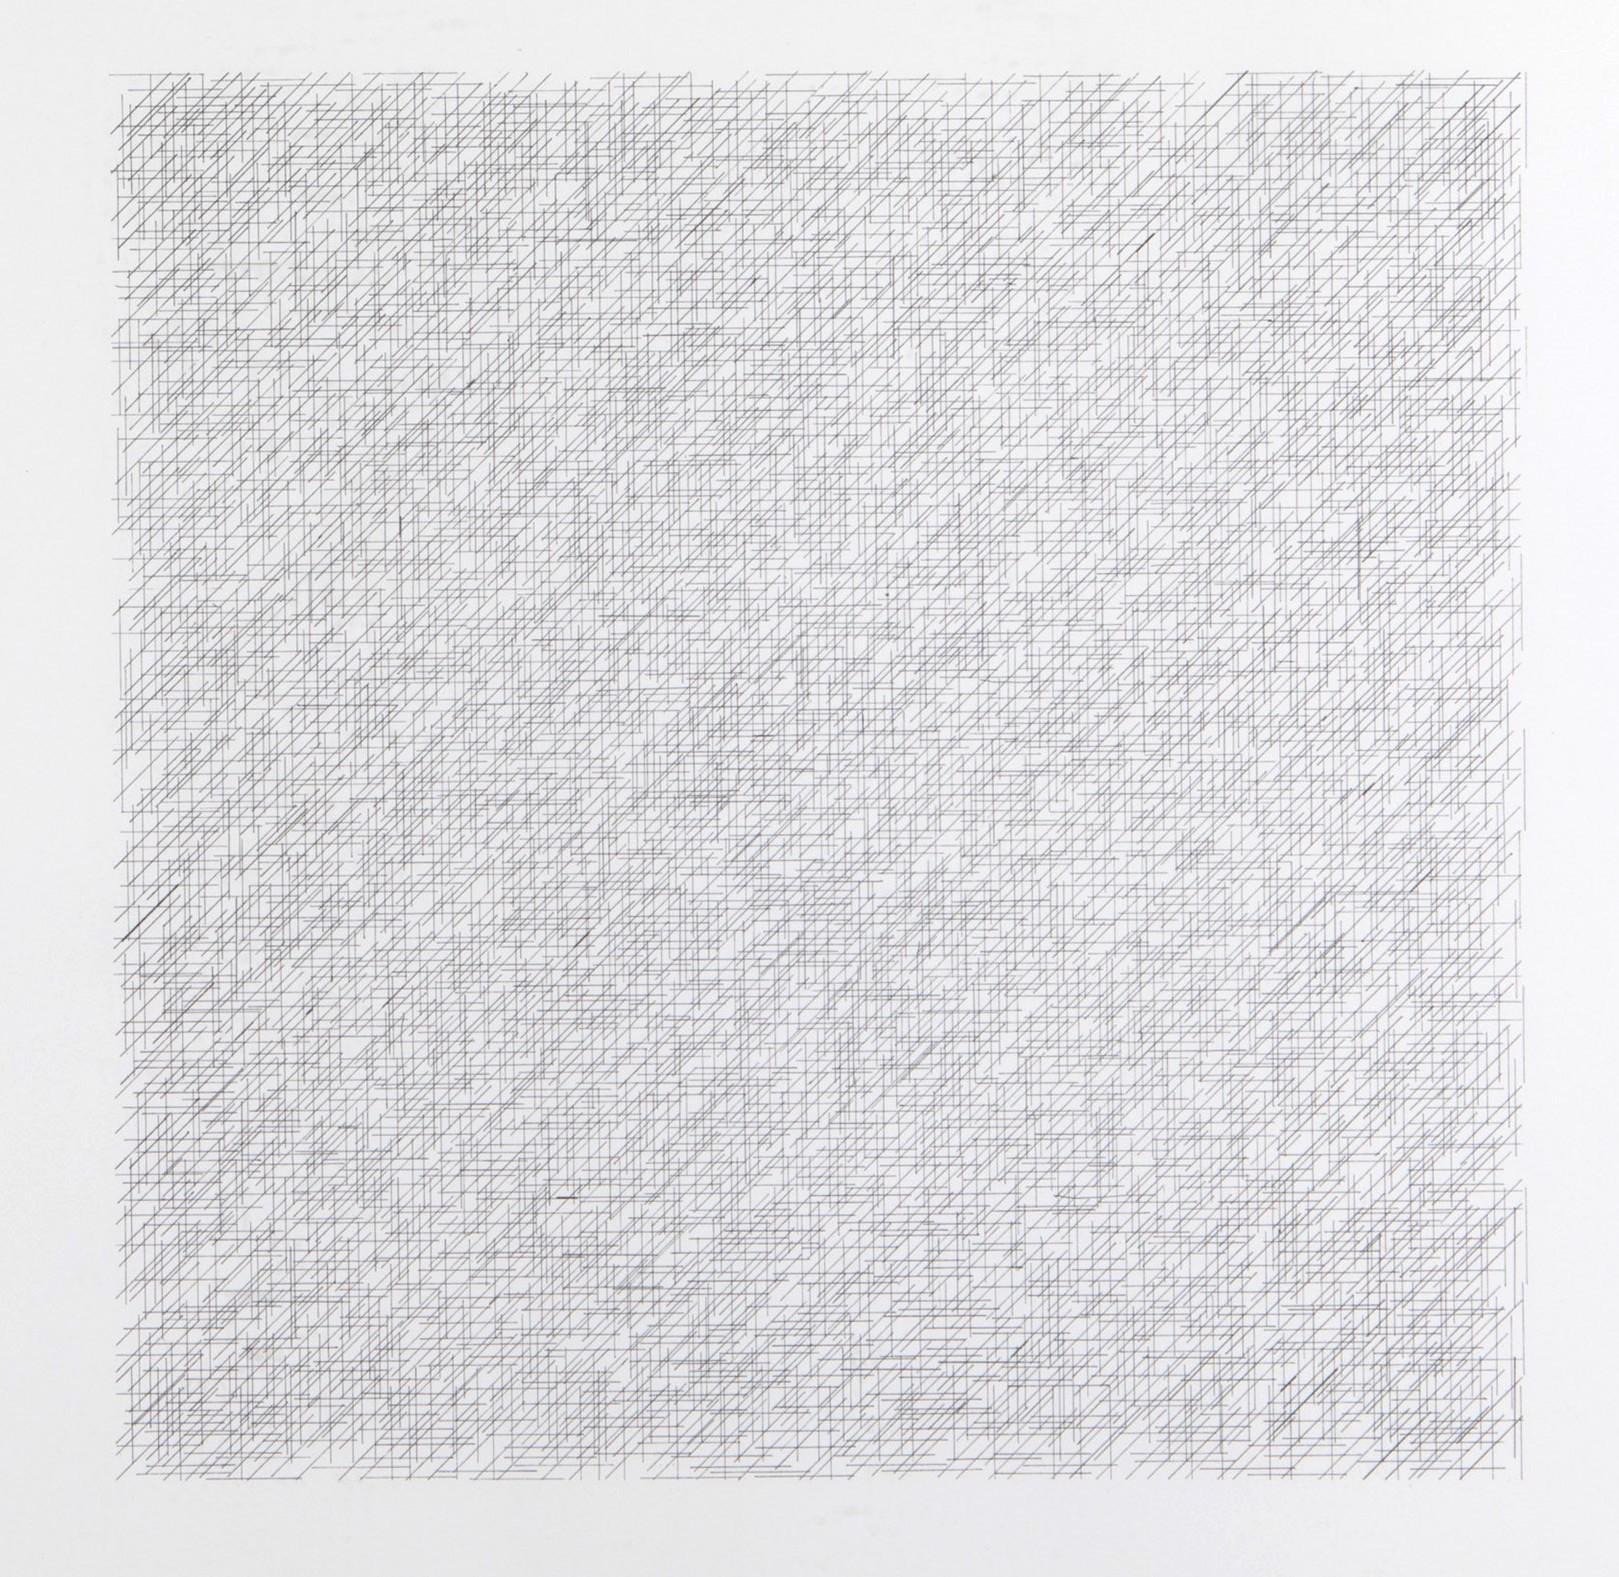 Sol LeWitt Abstract Print - Lines of 1 Inch in 4 Directions and All Combinations, Plate #13 - 1971 